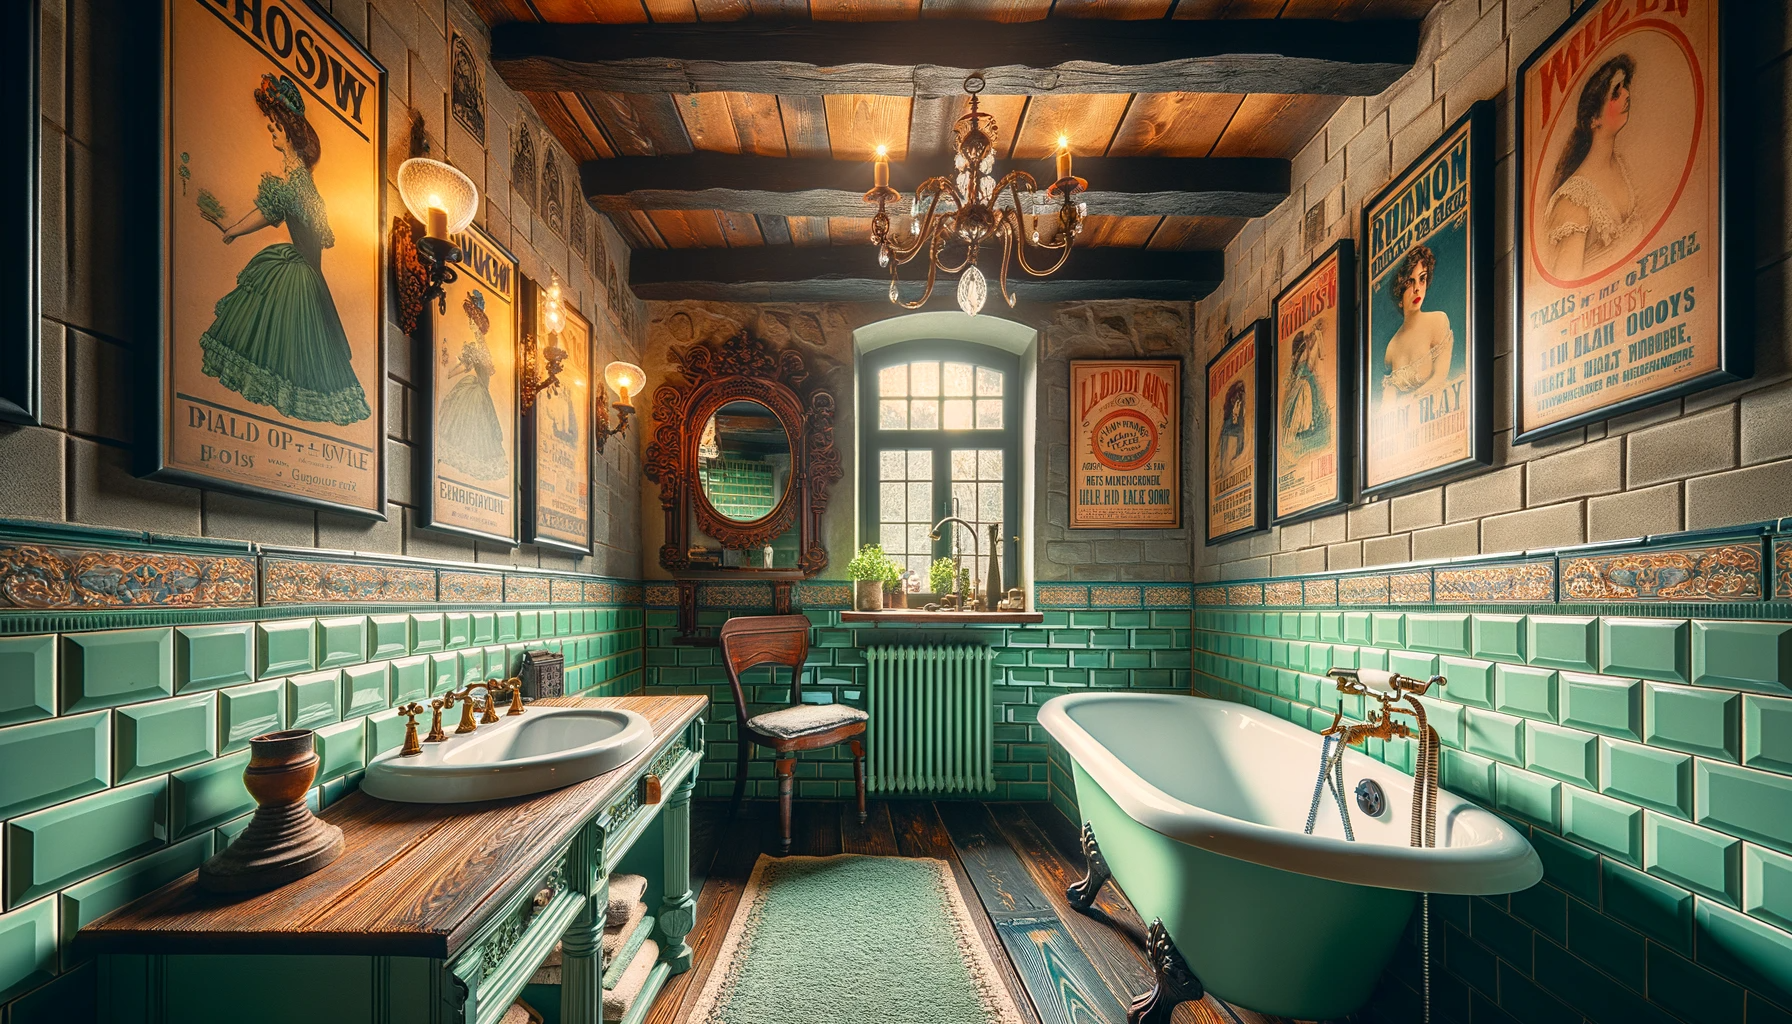 Photo of a retro bathroom inside a cottage, with mint green subway tiles, a clawfoot bathtub, and exposed wooden beams. Vintage posters adorn the walls, and the room is illuminated by rustic wall sconces and an ornate chandelier.